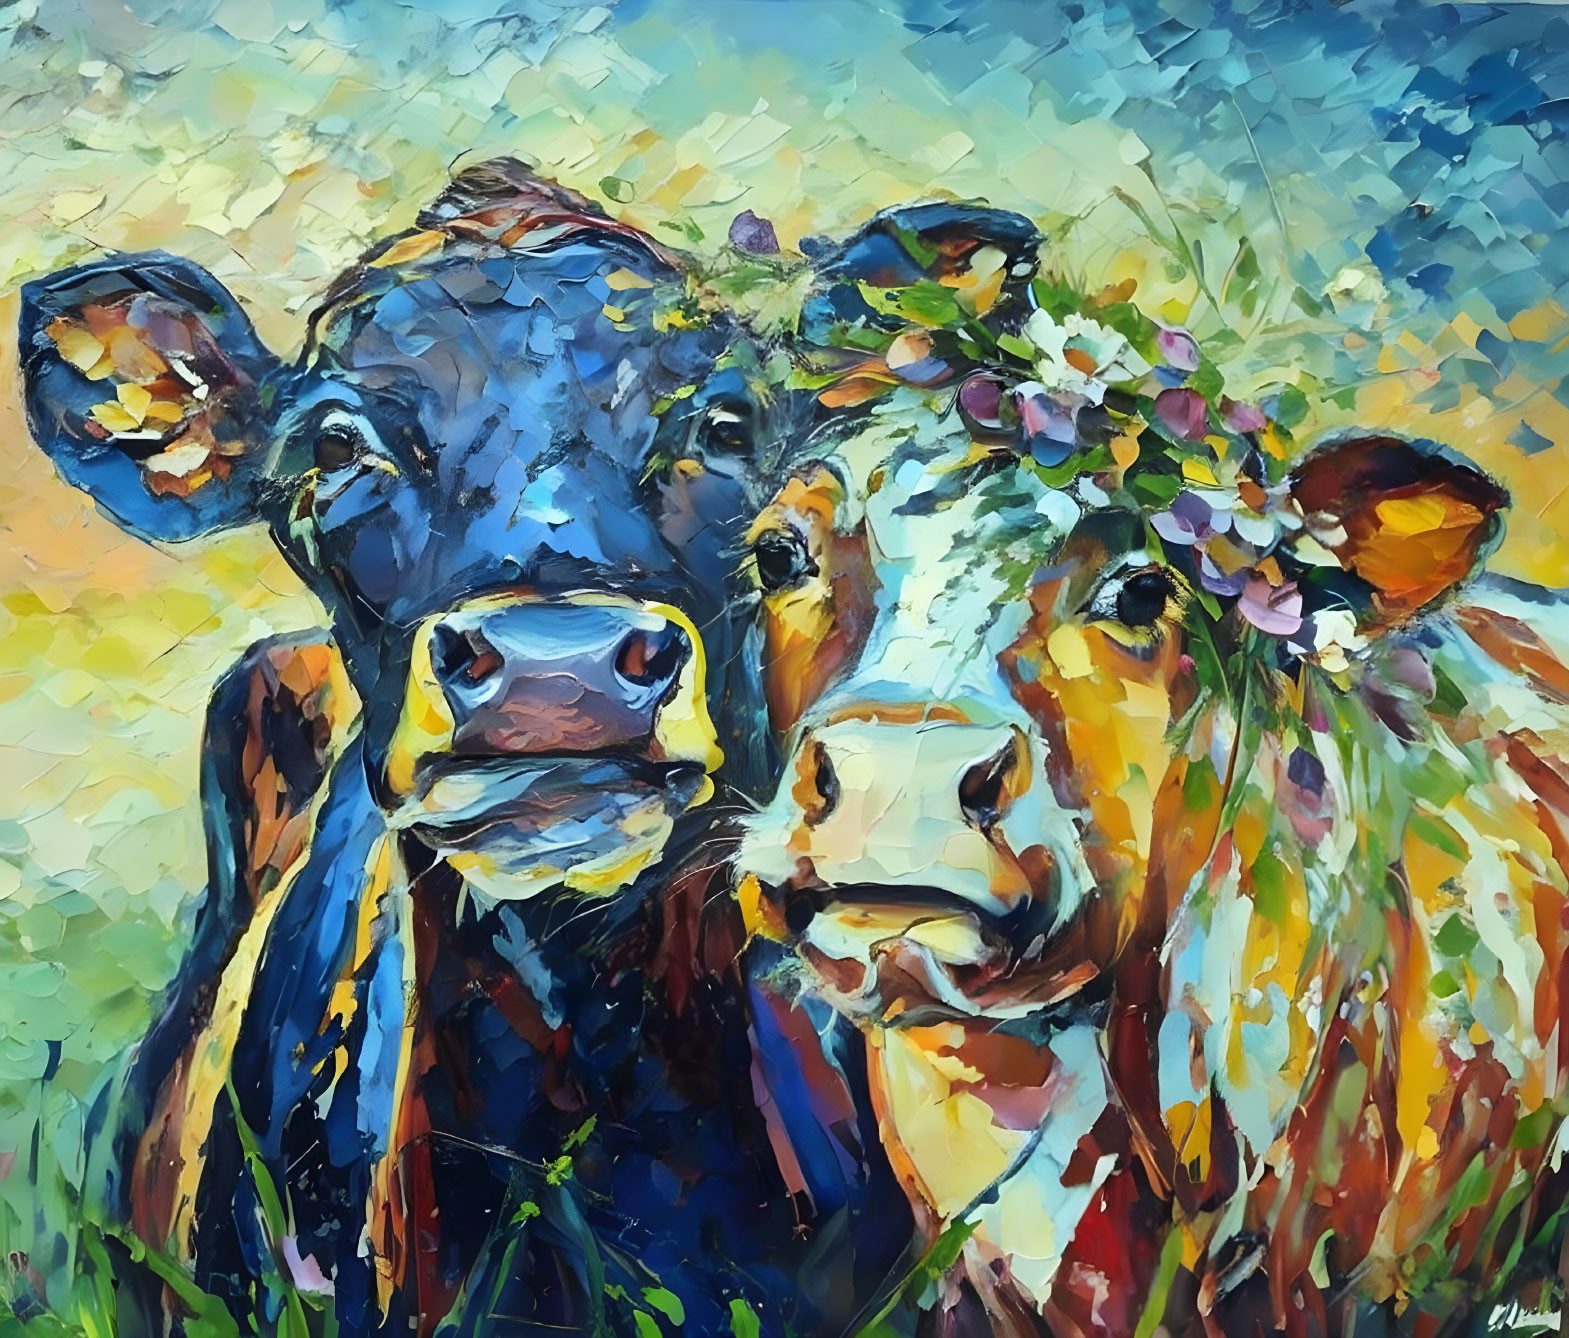 Vibrant impressionist painting of cows with floral crown on textured blue and yellow backdrop